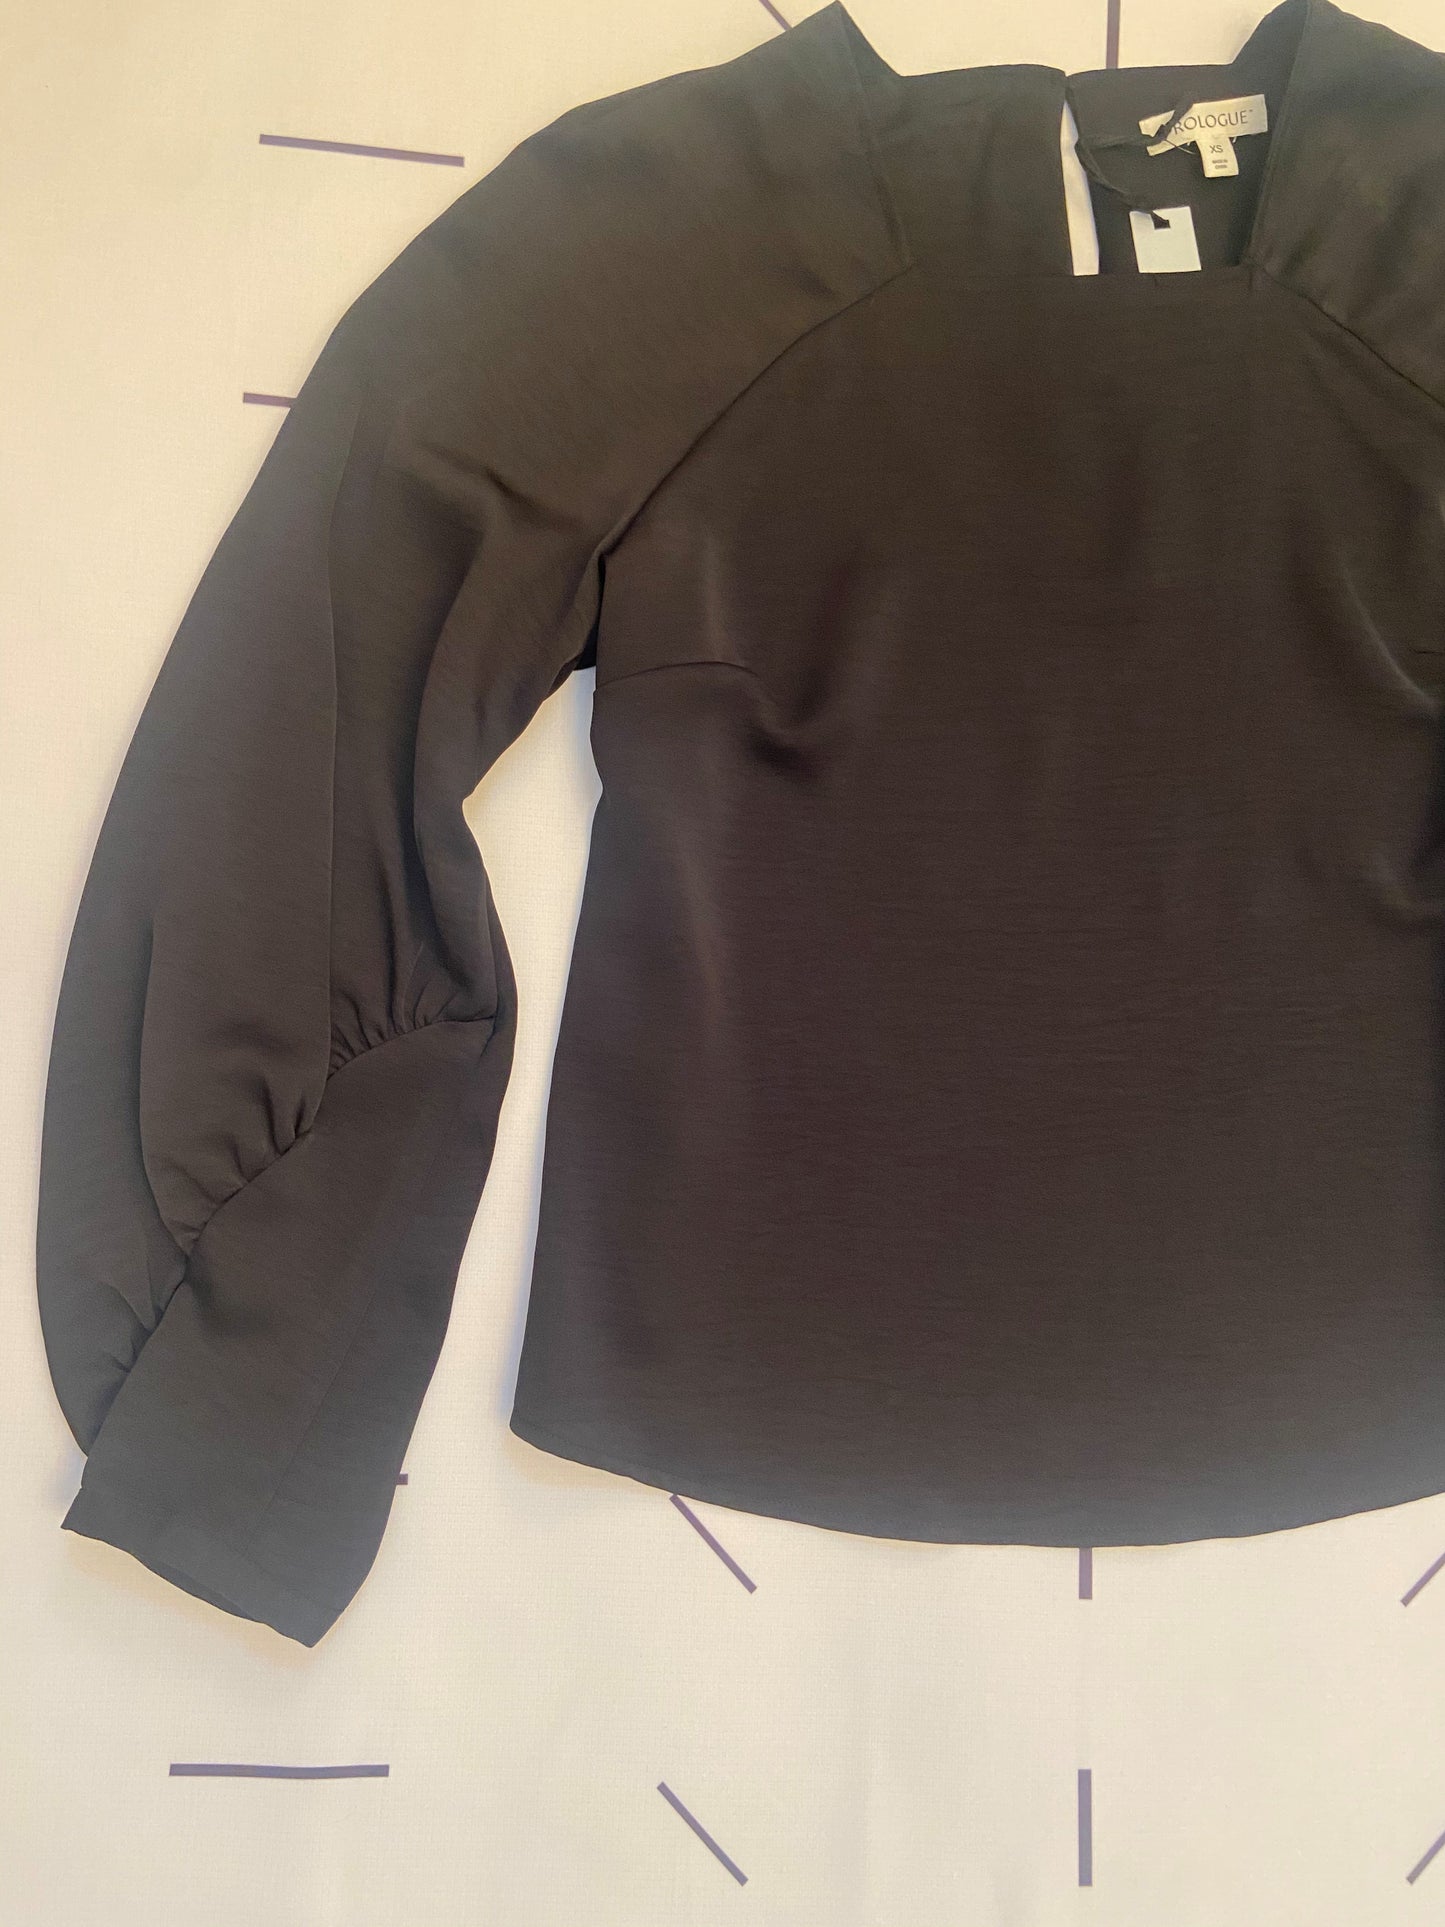 Solid Black Long Sleeve Blouse - NWT - XS